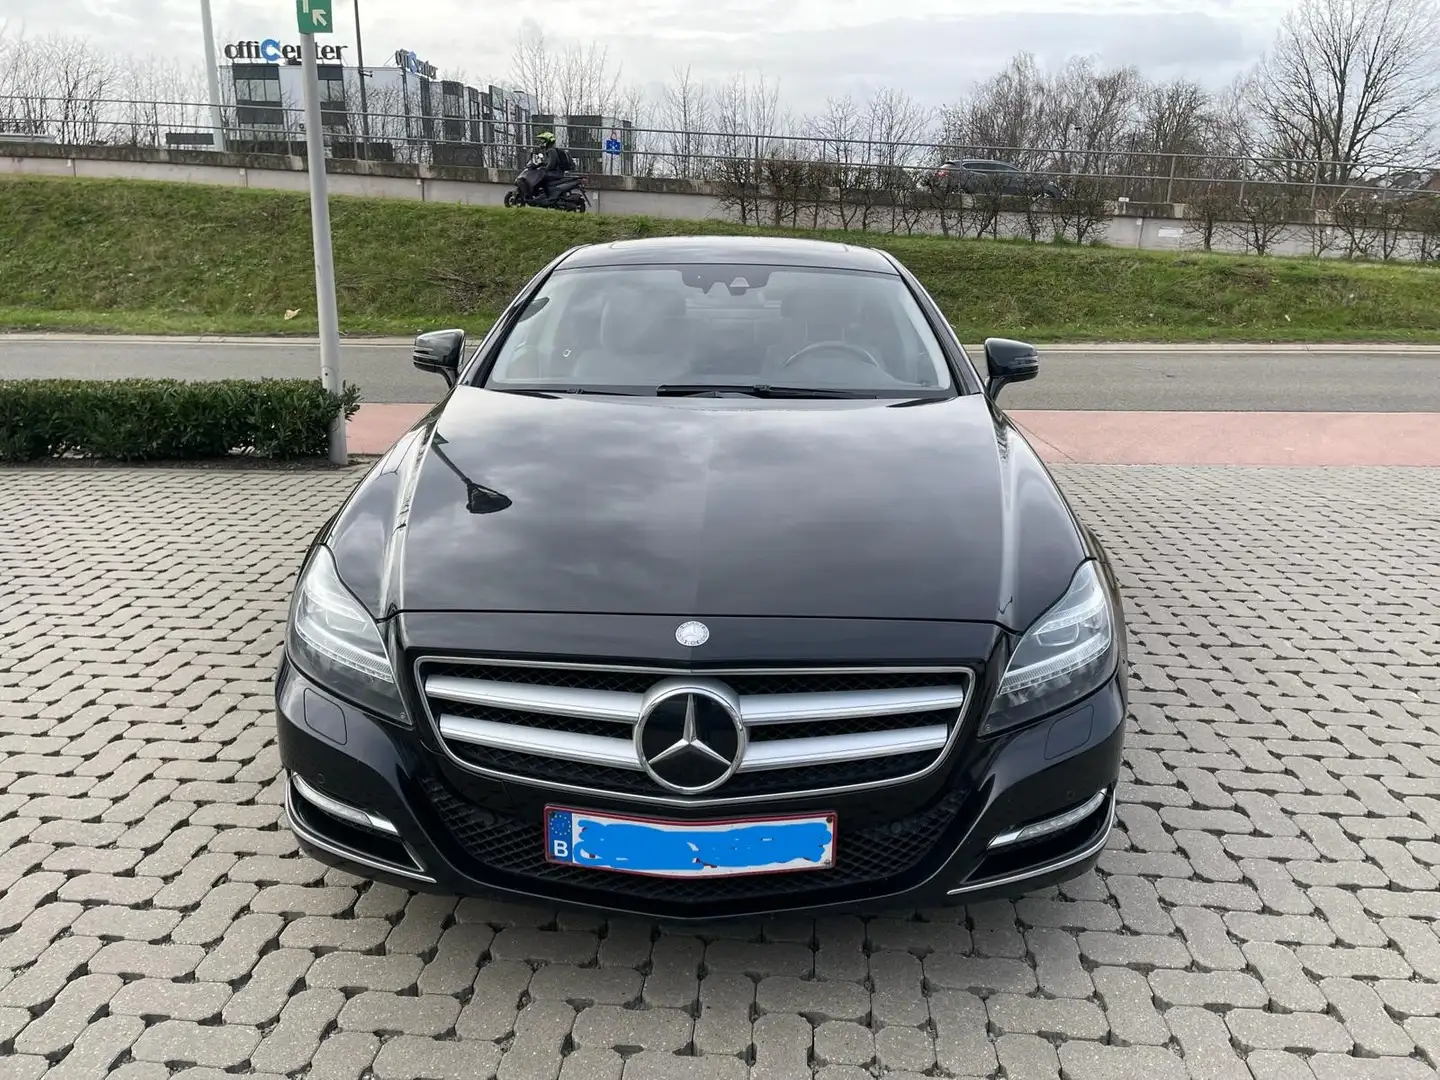 Mercedes-Benz CLS 250 CLS 250 CDI DPF BlueEFFICIENCY 7G-TRONIC Edition 1 Nero - 2